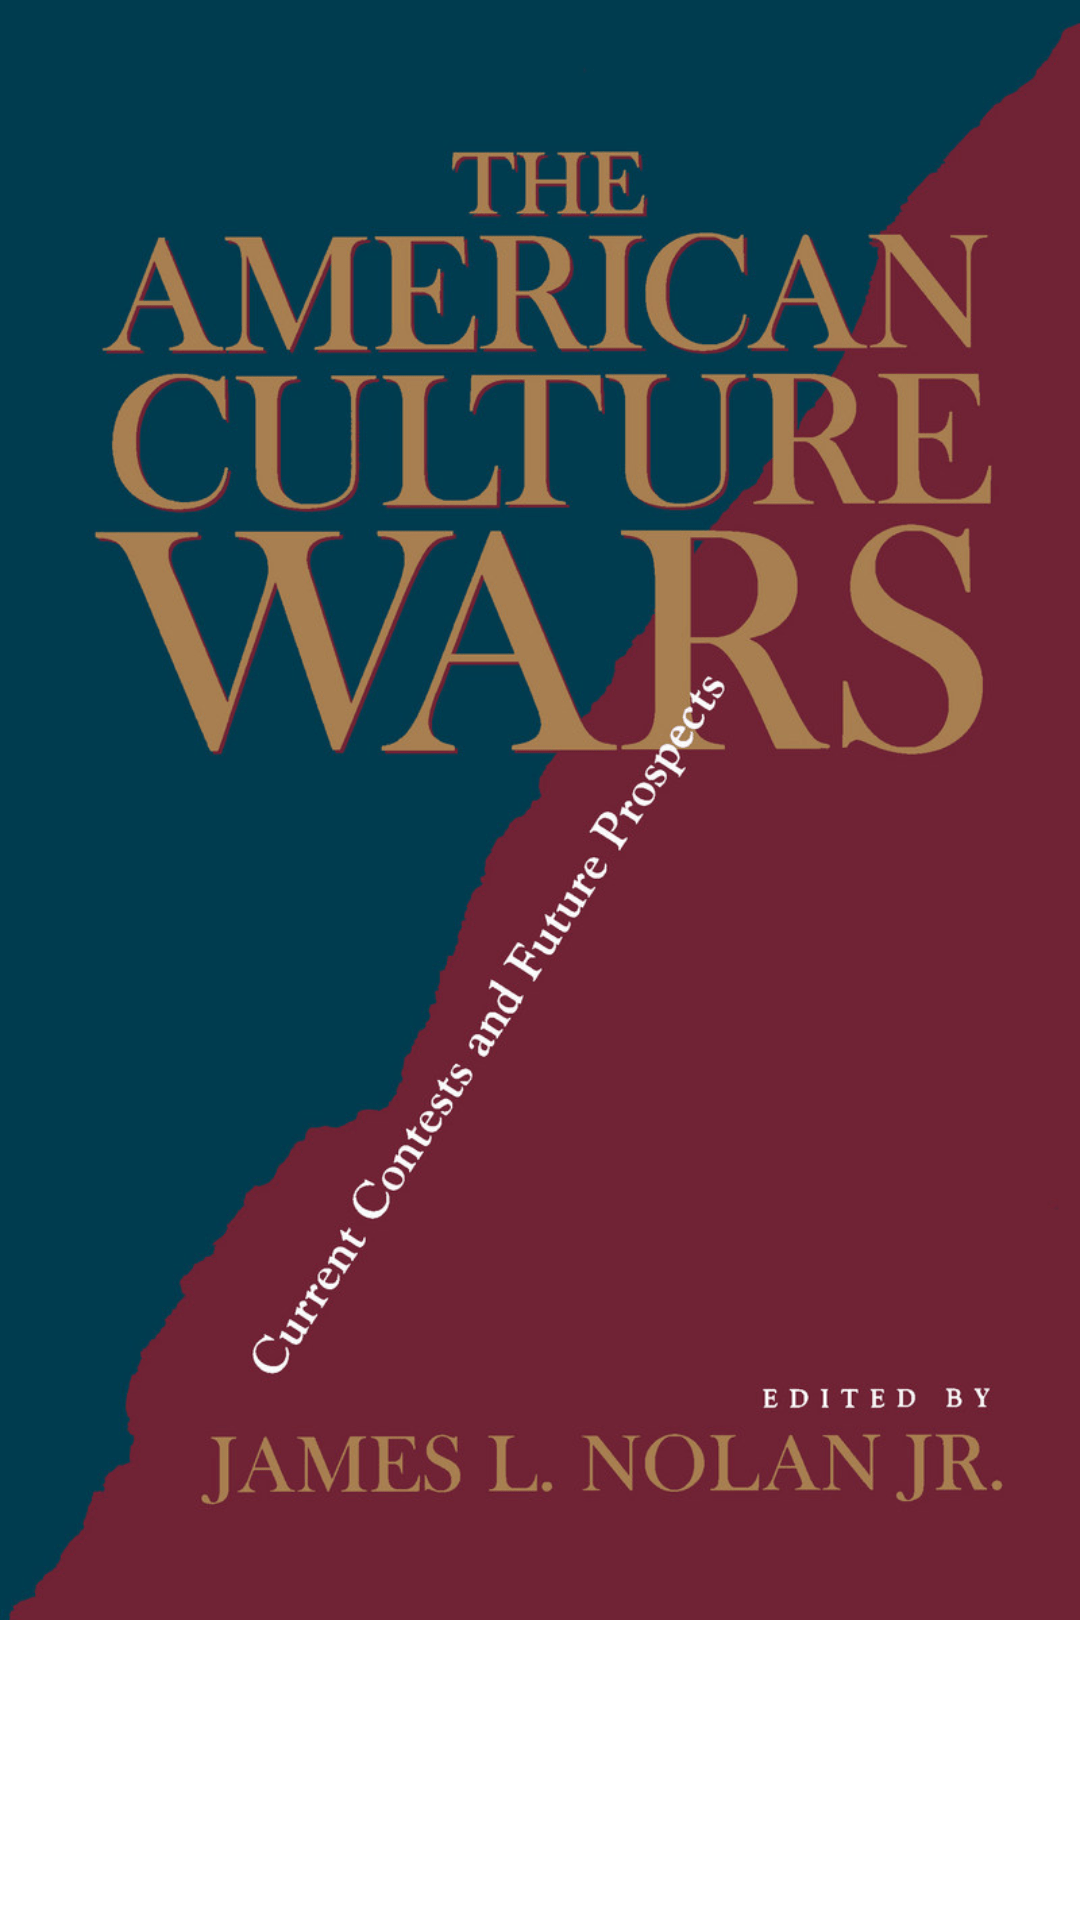 The American Culture Wars: Current Contests and Future Prospects